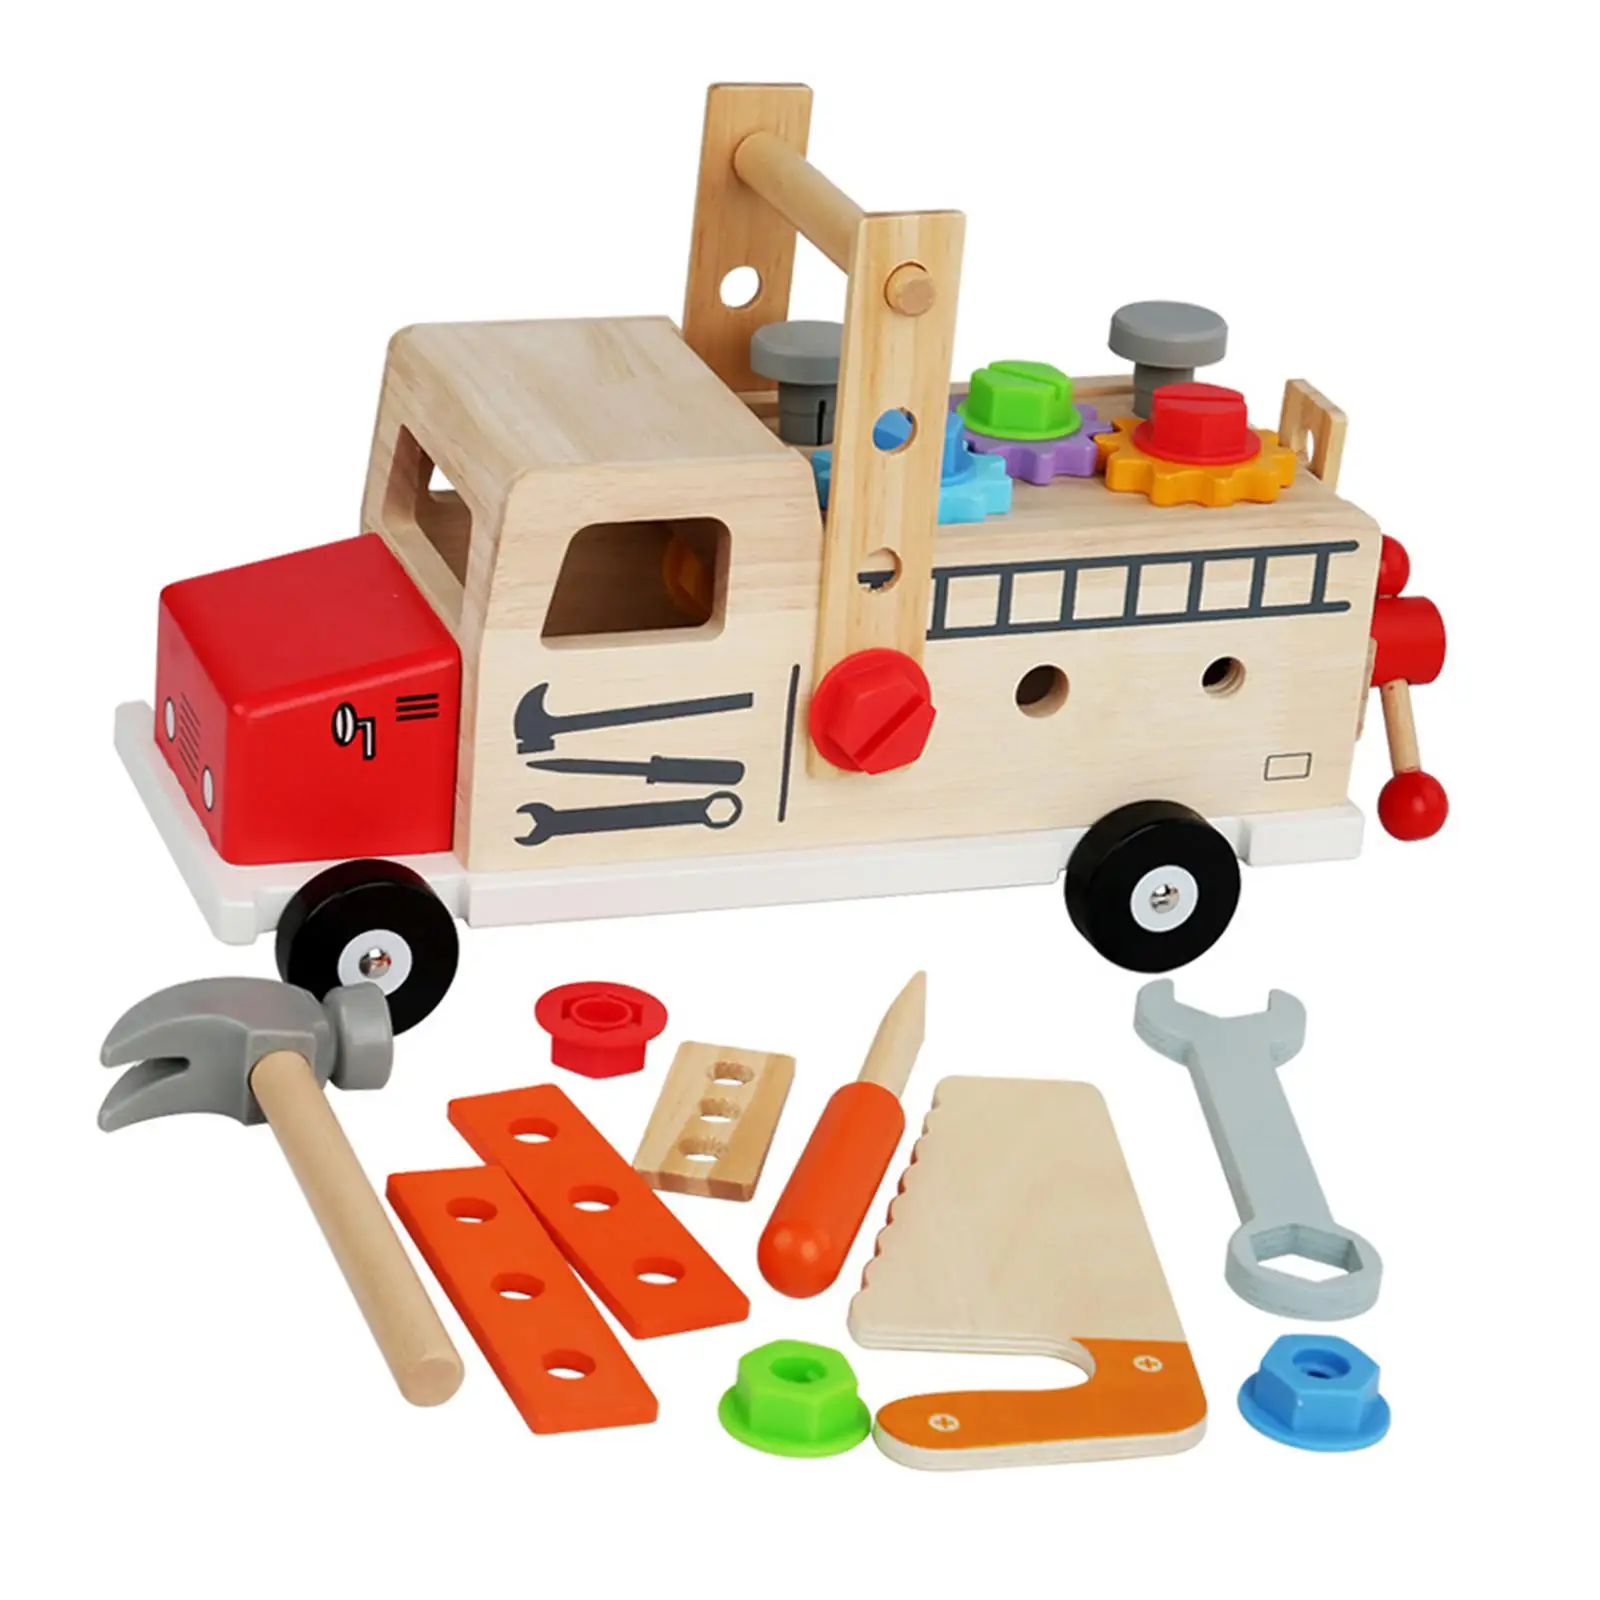 Construction Toy Wood Kids Tool Set Kids Tool Screwing Assembly Carpenter Toy for 3 4 5 6 Years Old Children Kids Party Favors